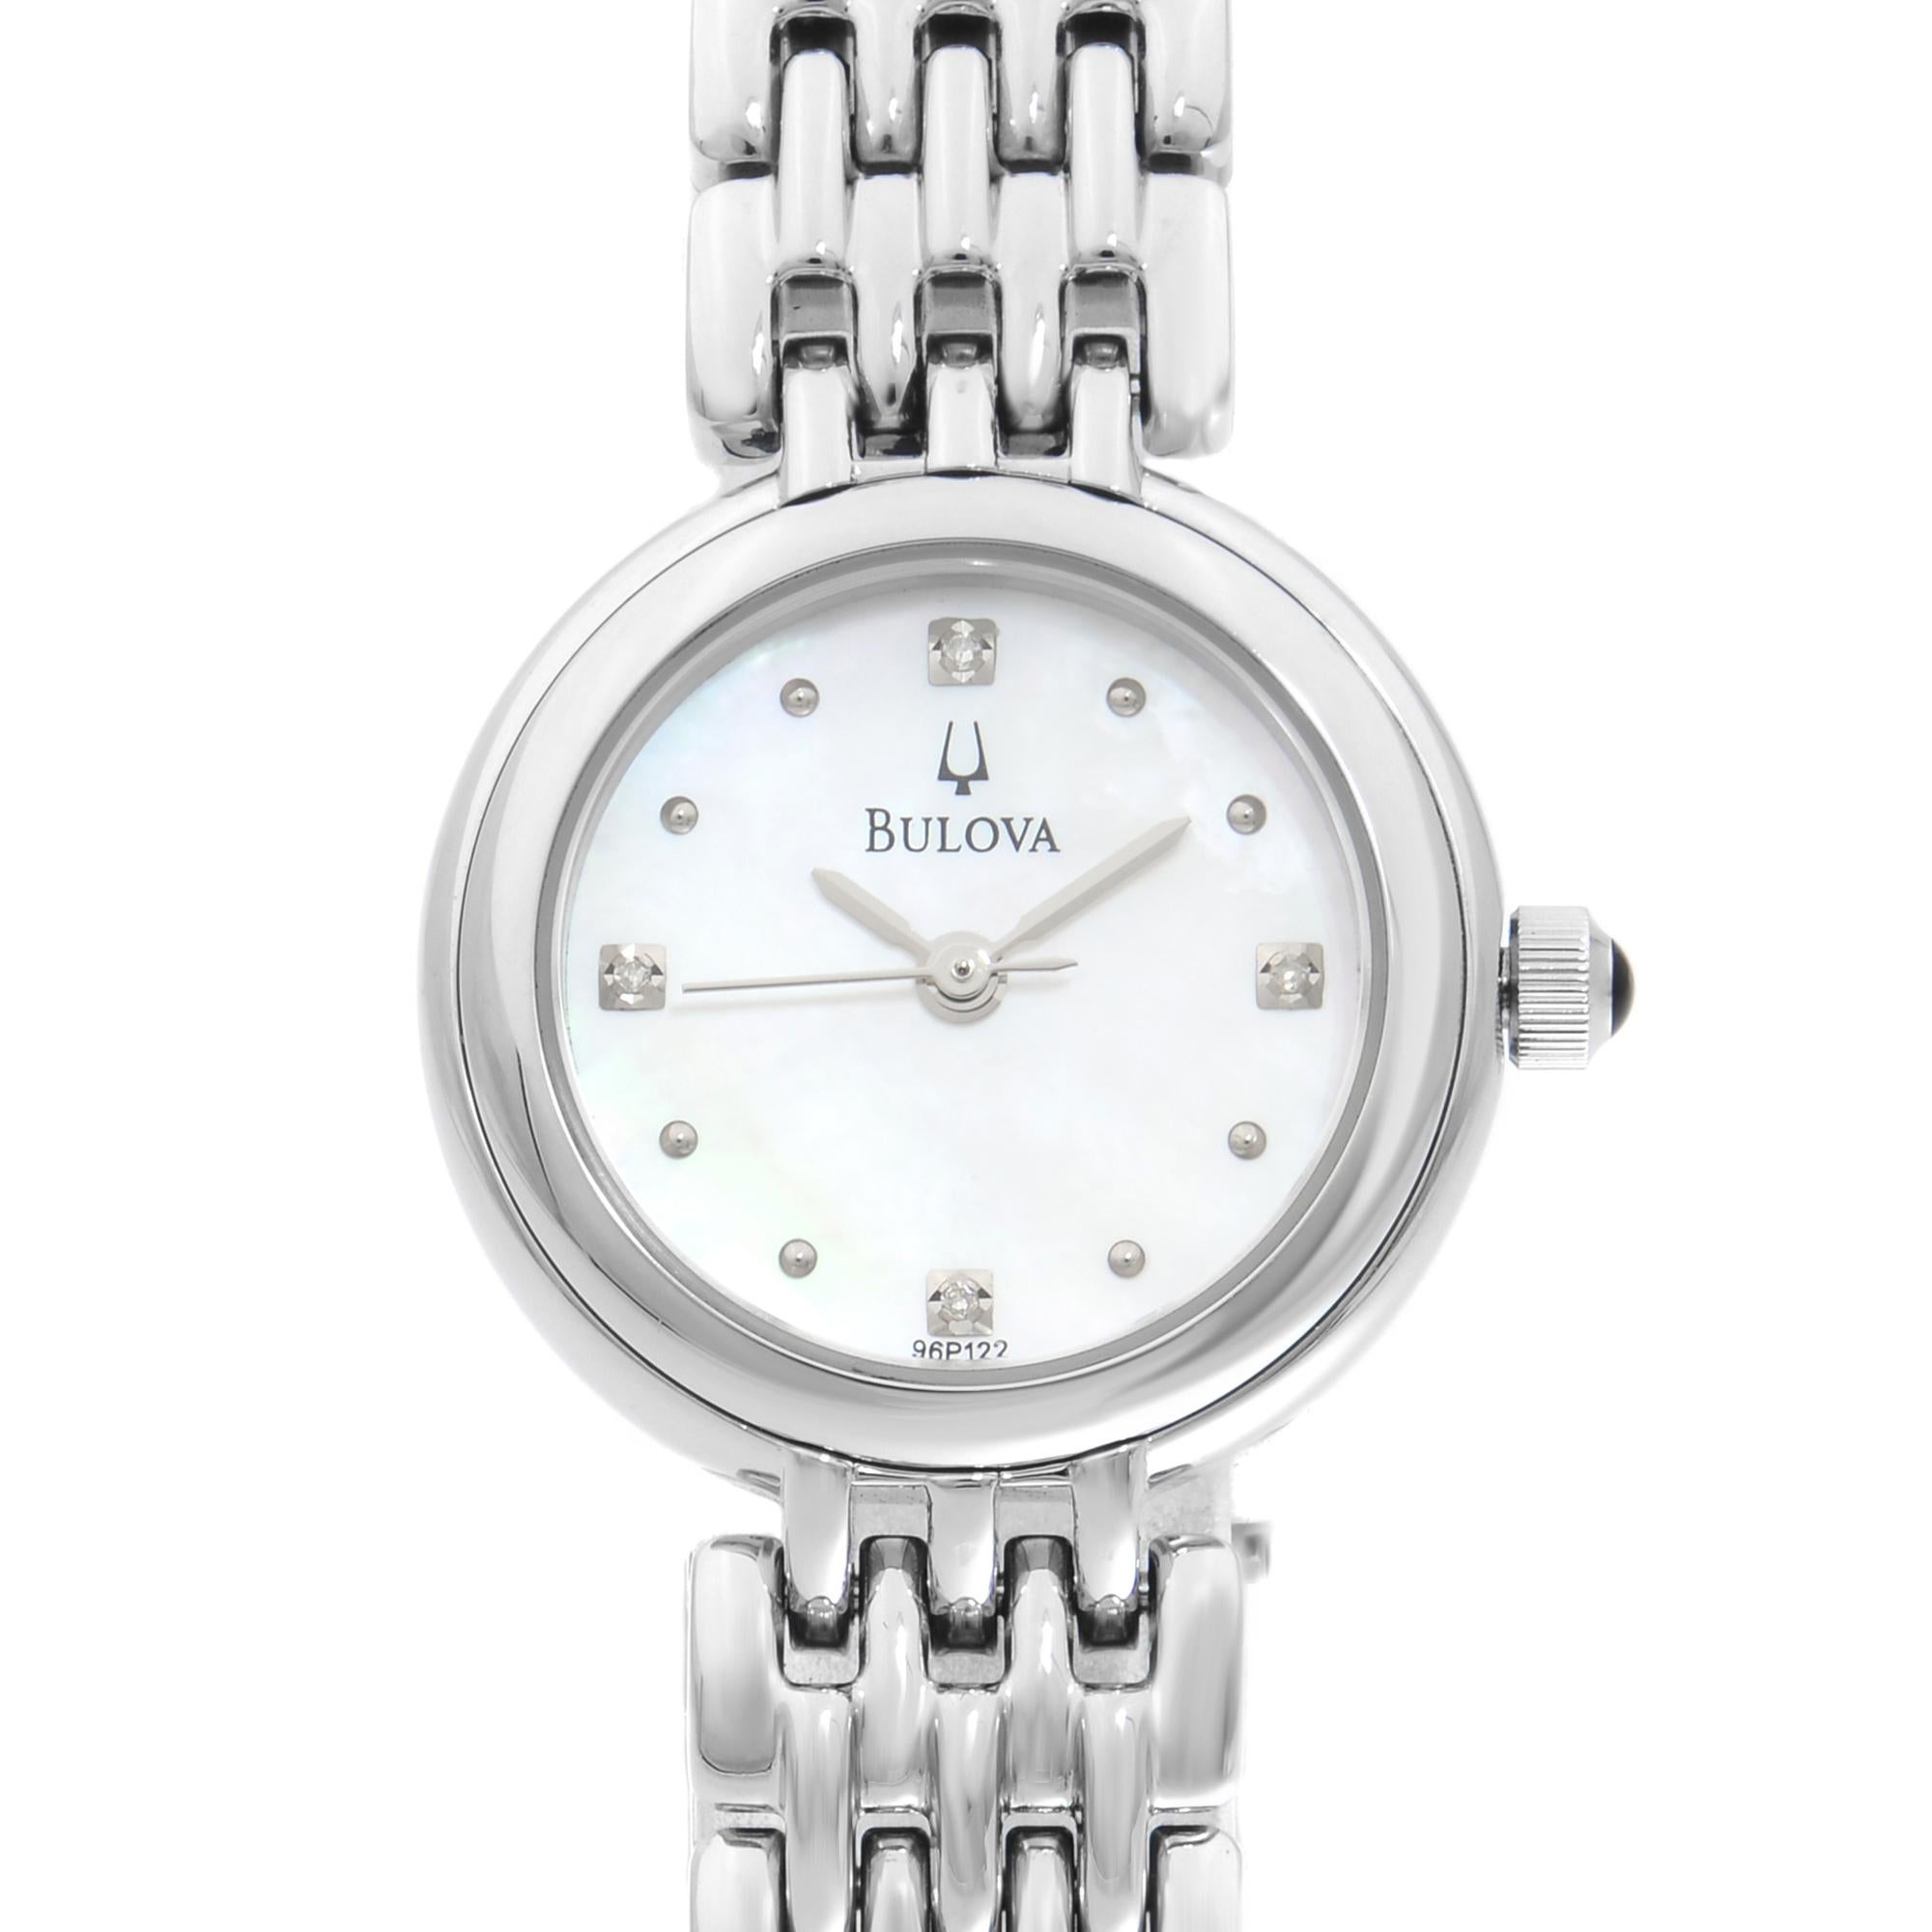 This timepiece comes original box and papers. 
Stainless steel case with a stainless steel bracelet. Fixed stainless steel bezel. 
Silver dial with silver-tone hands and dot hour markers. Luminescent hands and markers. 
Diamond markers at the 3, 6,